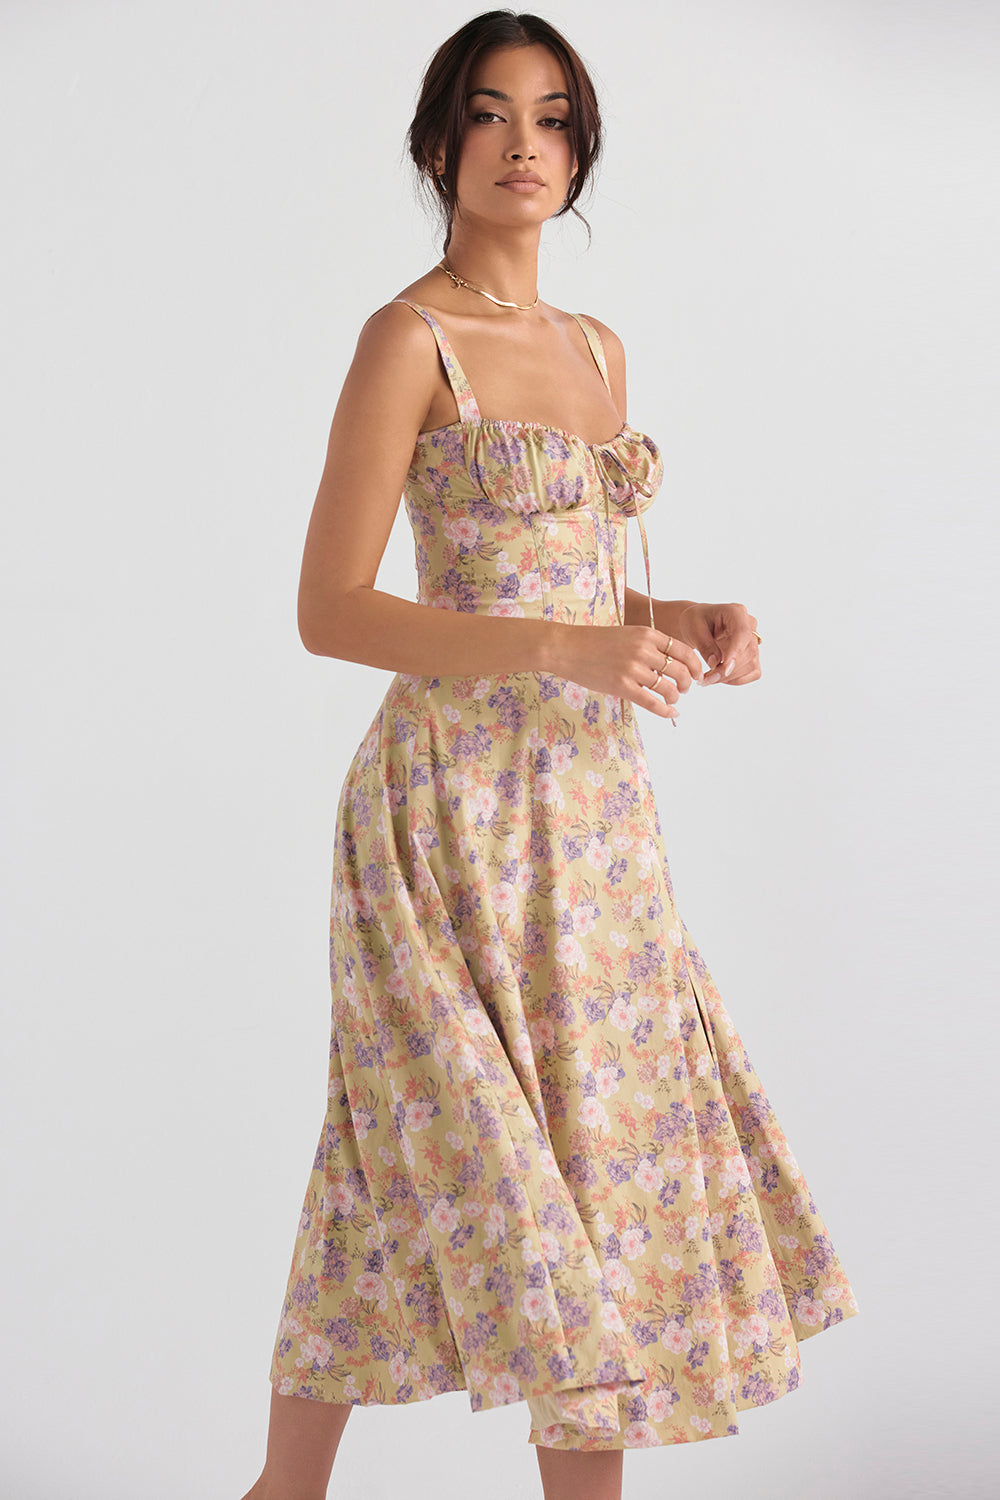 Alya | Floral Bustier Dress with Waist Shaping